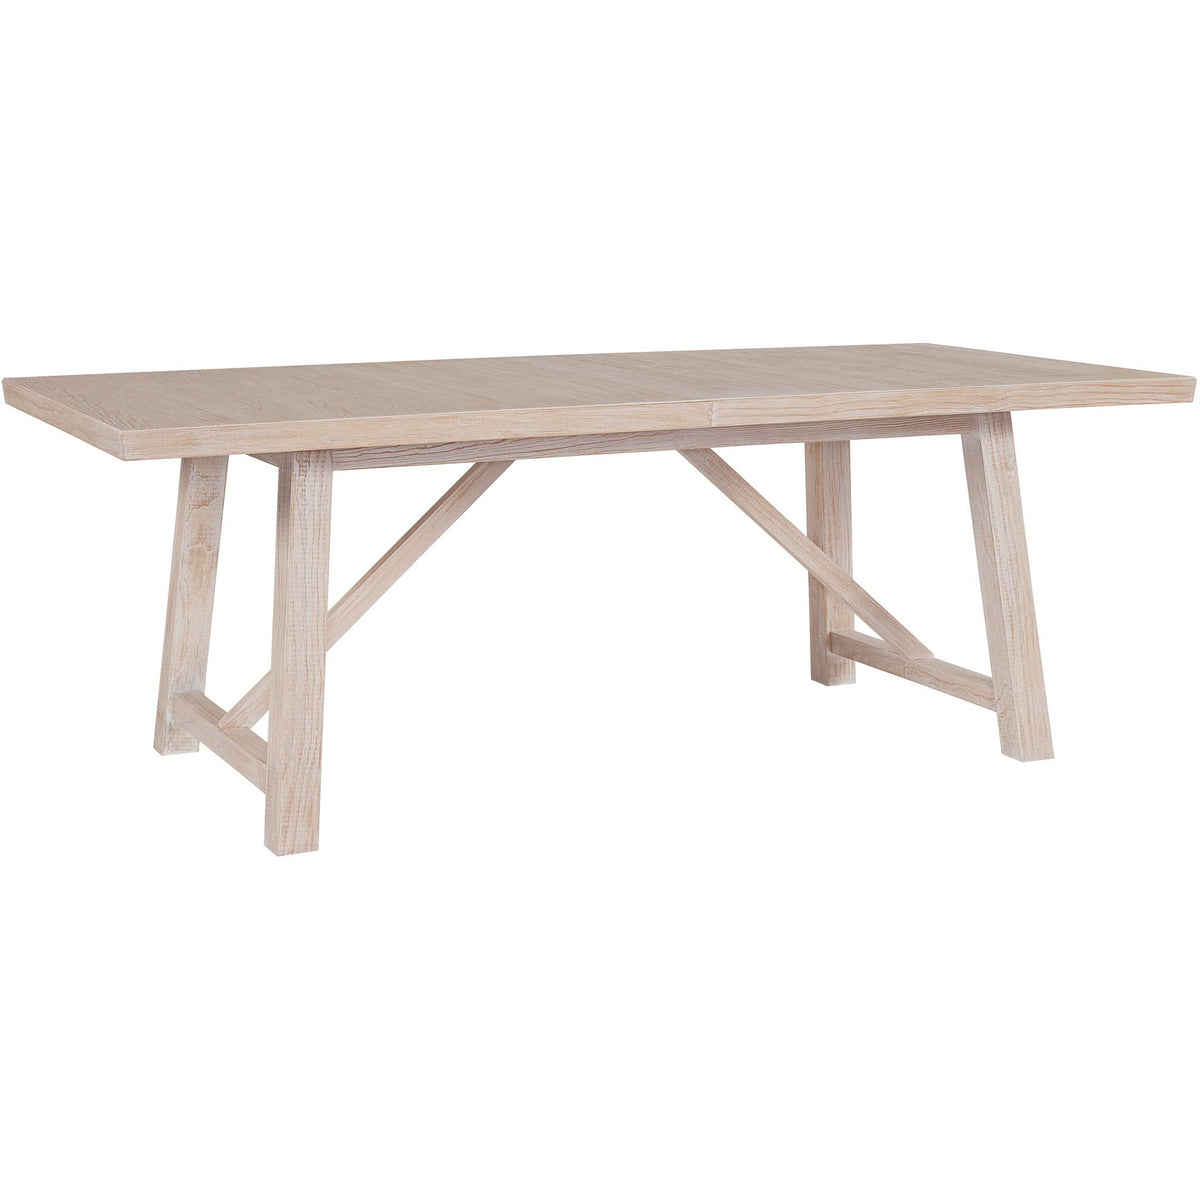 Getaway Dining Table - Be Bold Furniture